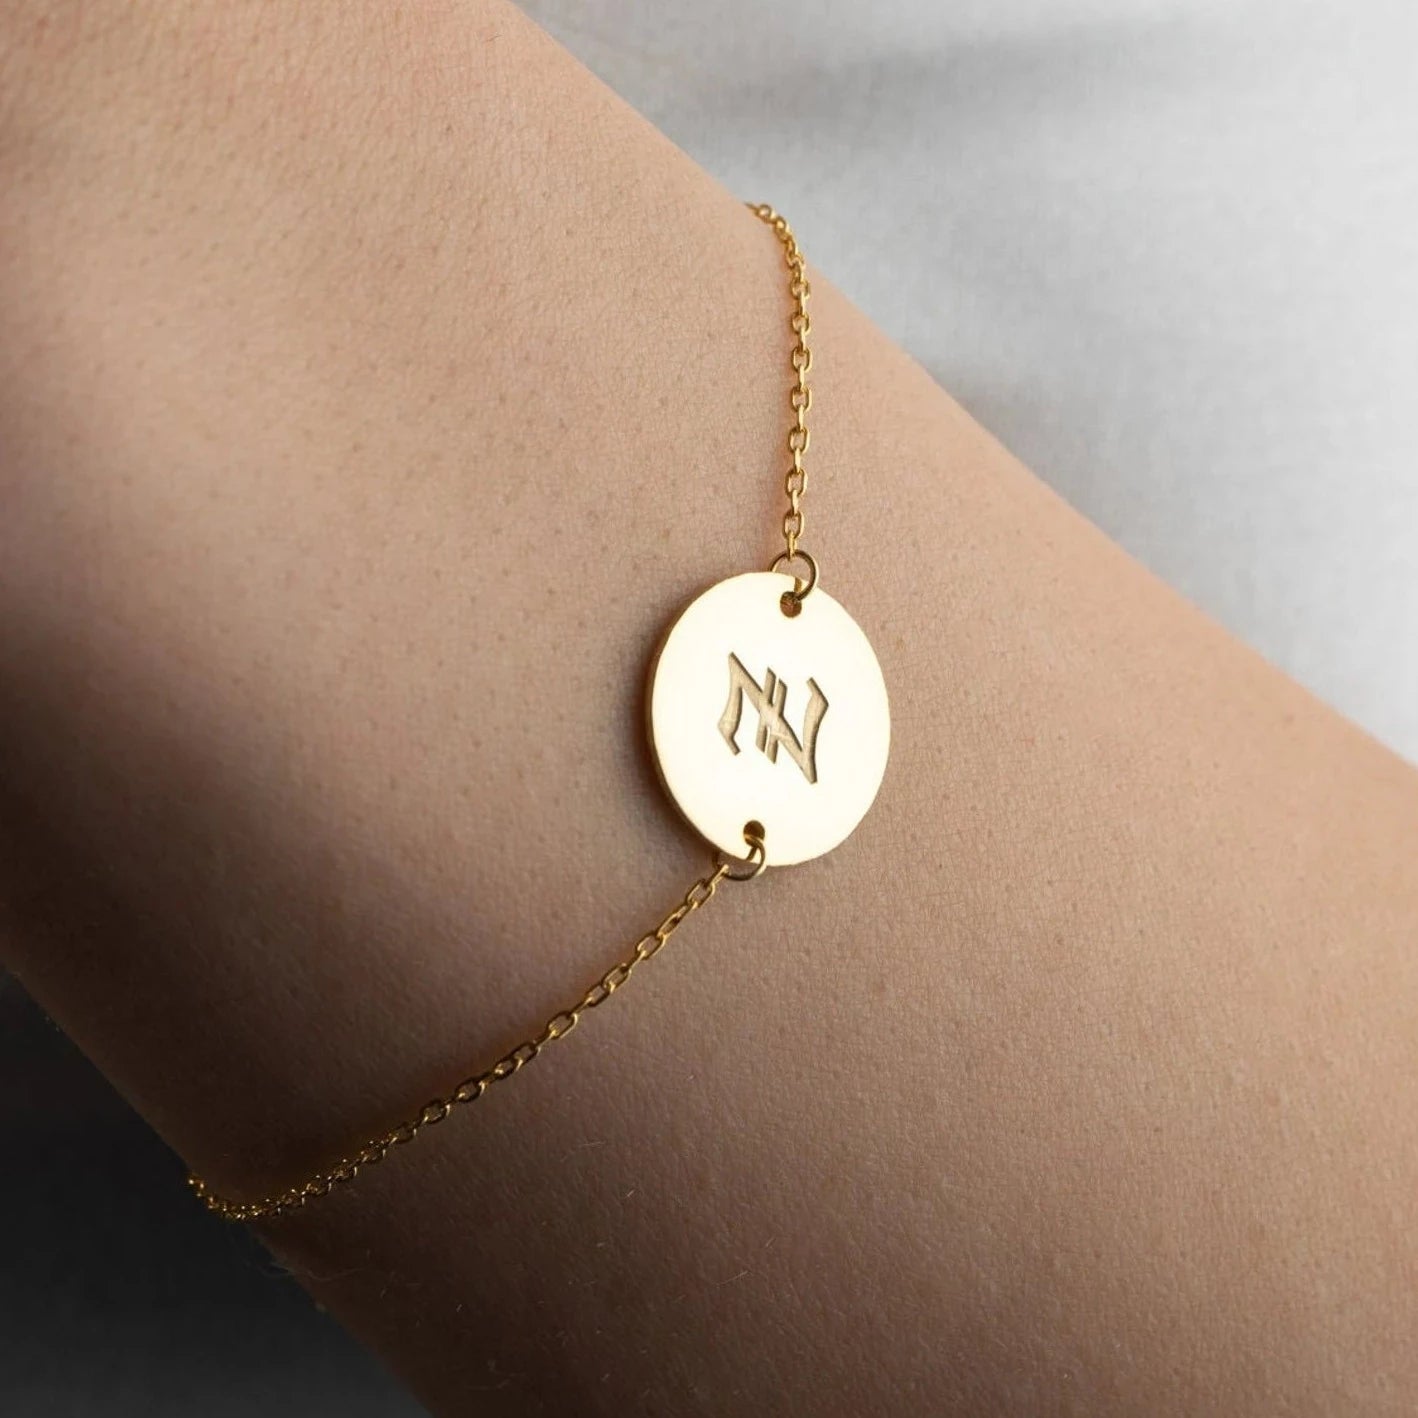 Looking for a truly exceptional gift? Burst of Arabia's Disc Coin Initial Bracelet is the epitome of luxury, designed to make every woman feel special. Whether it's a birthday, Valentine's Day, anniversary, or simply to show your appreciation, this piece is guaranteed to leave a lasting impression.